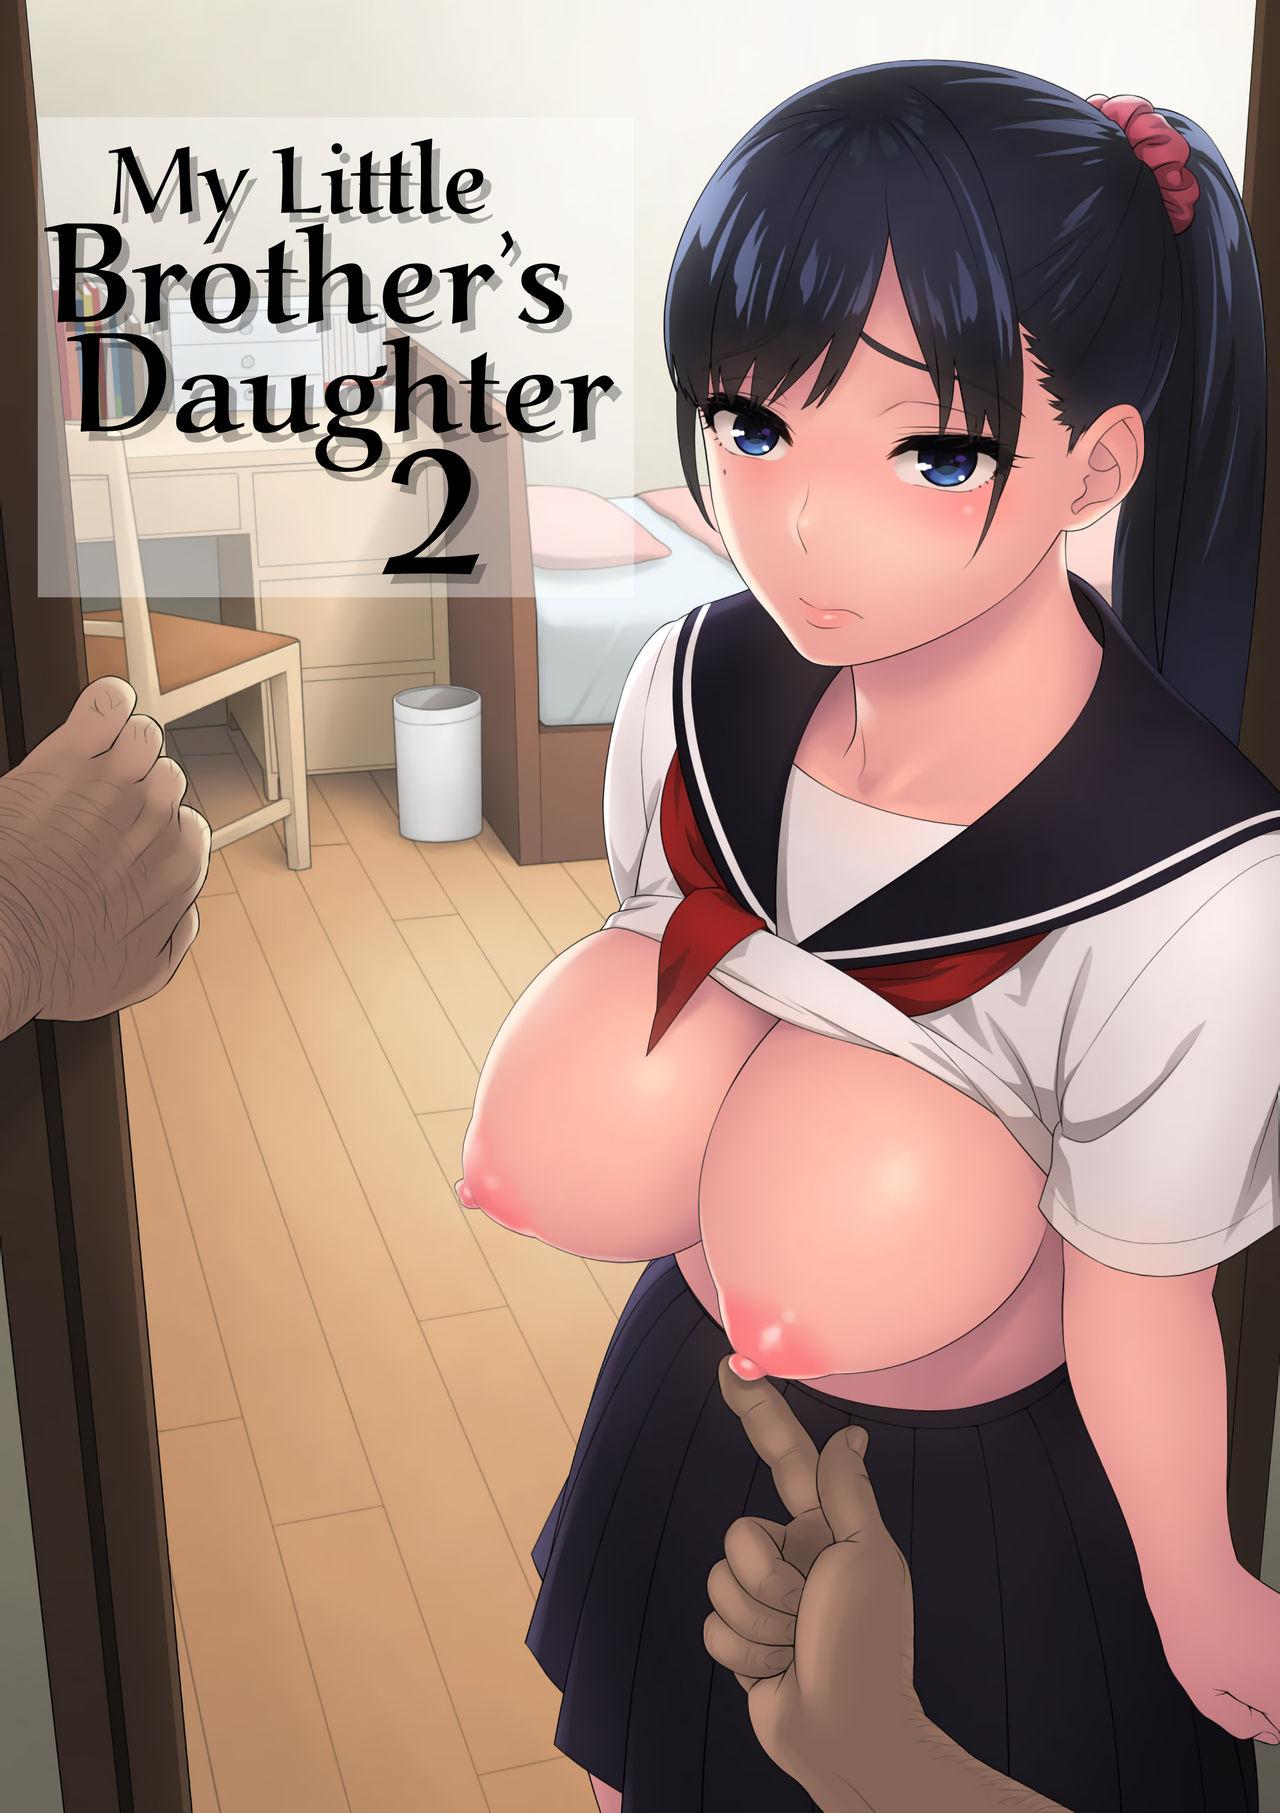 Otouto no Musume 2 | My Little Brother's Daughter 2 0